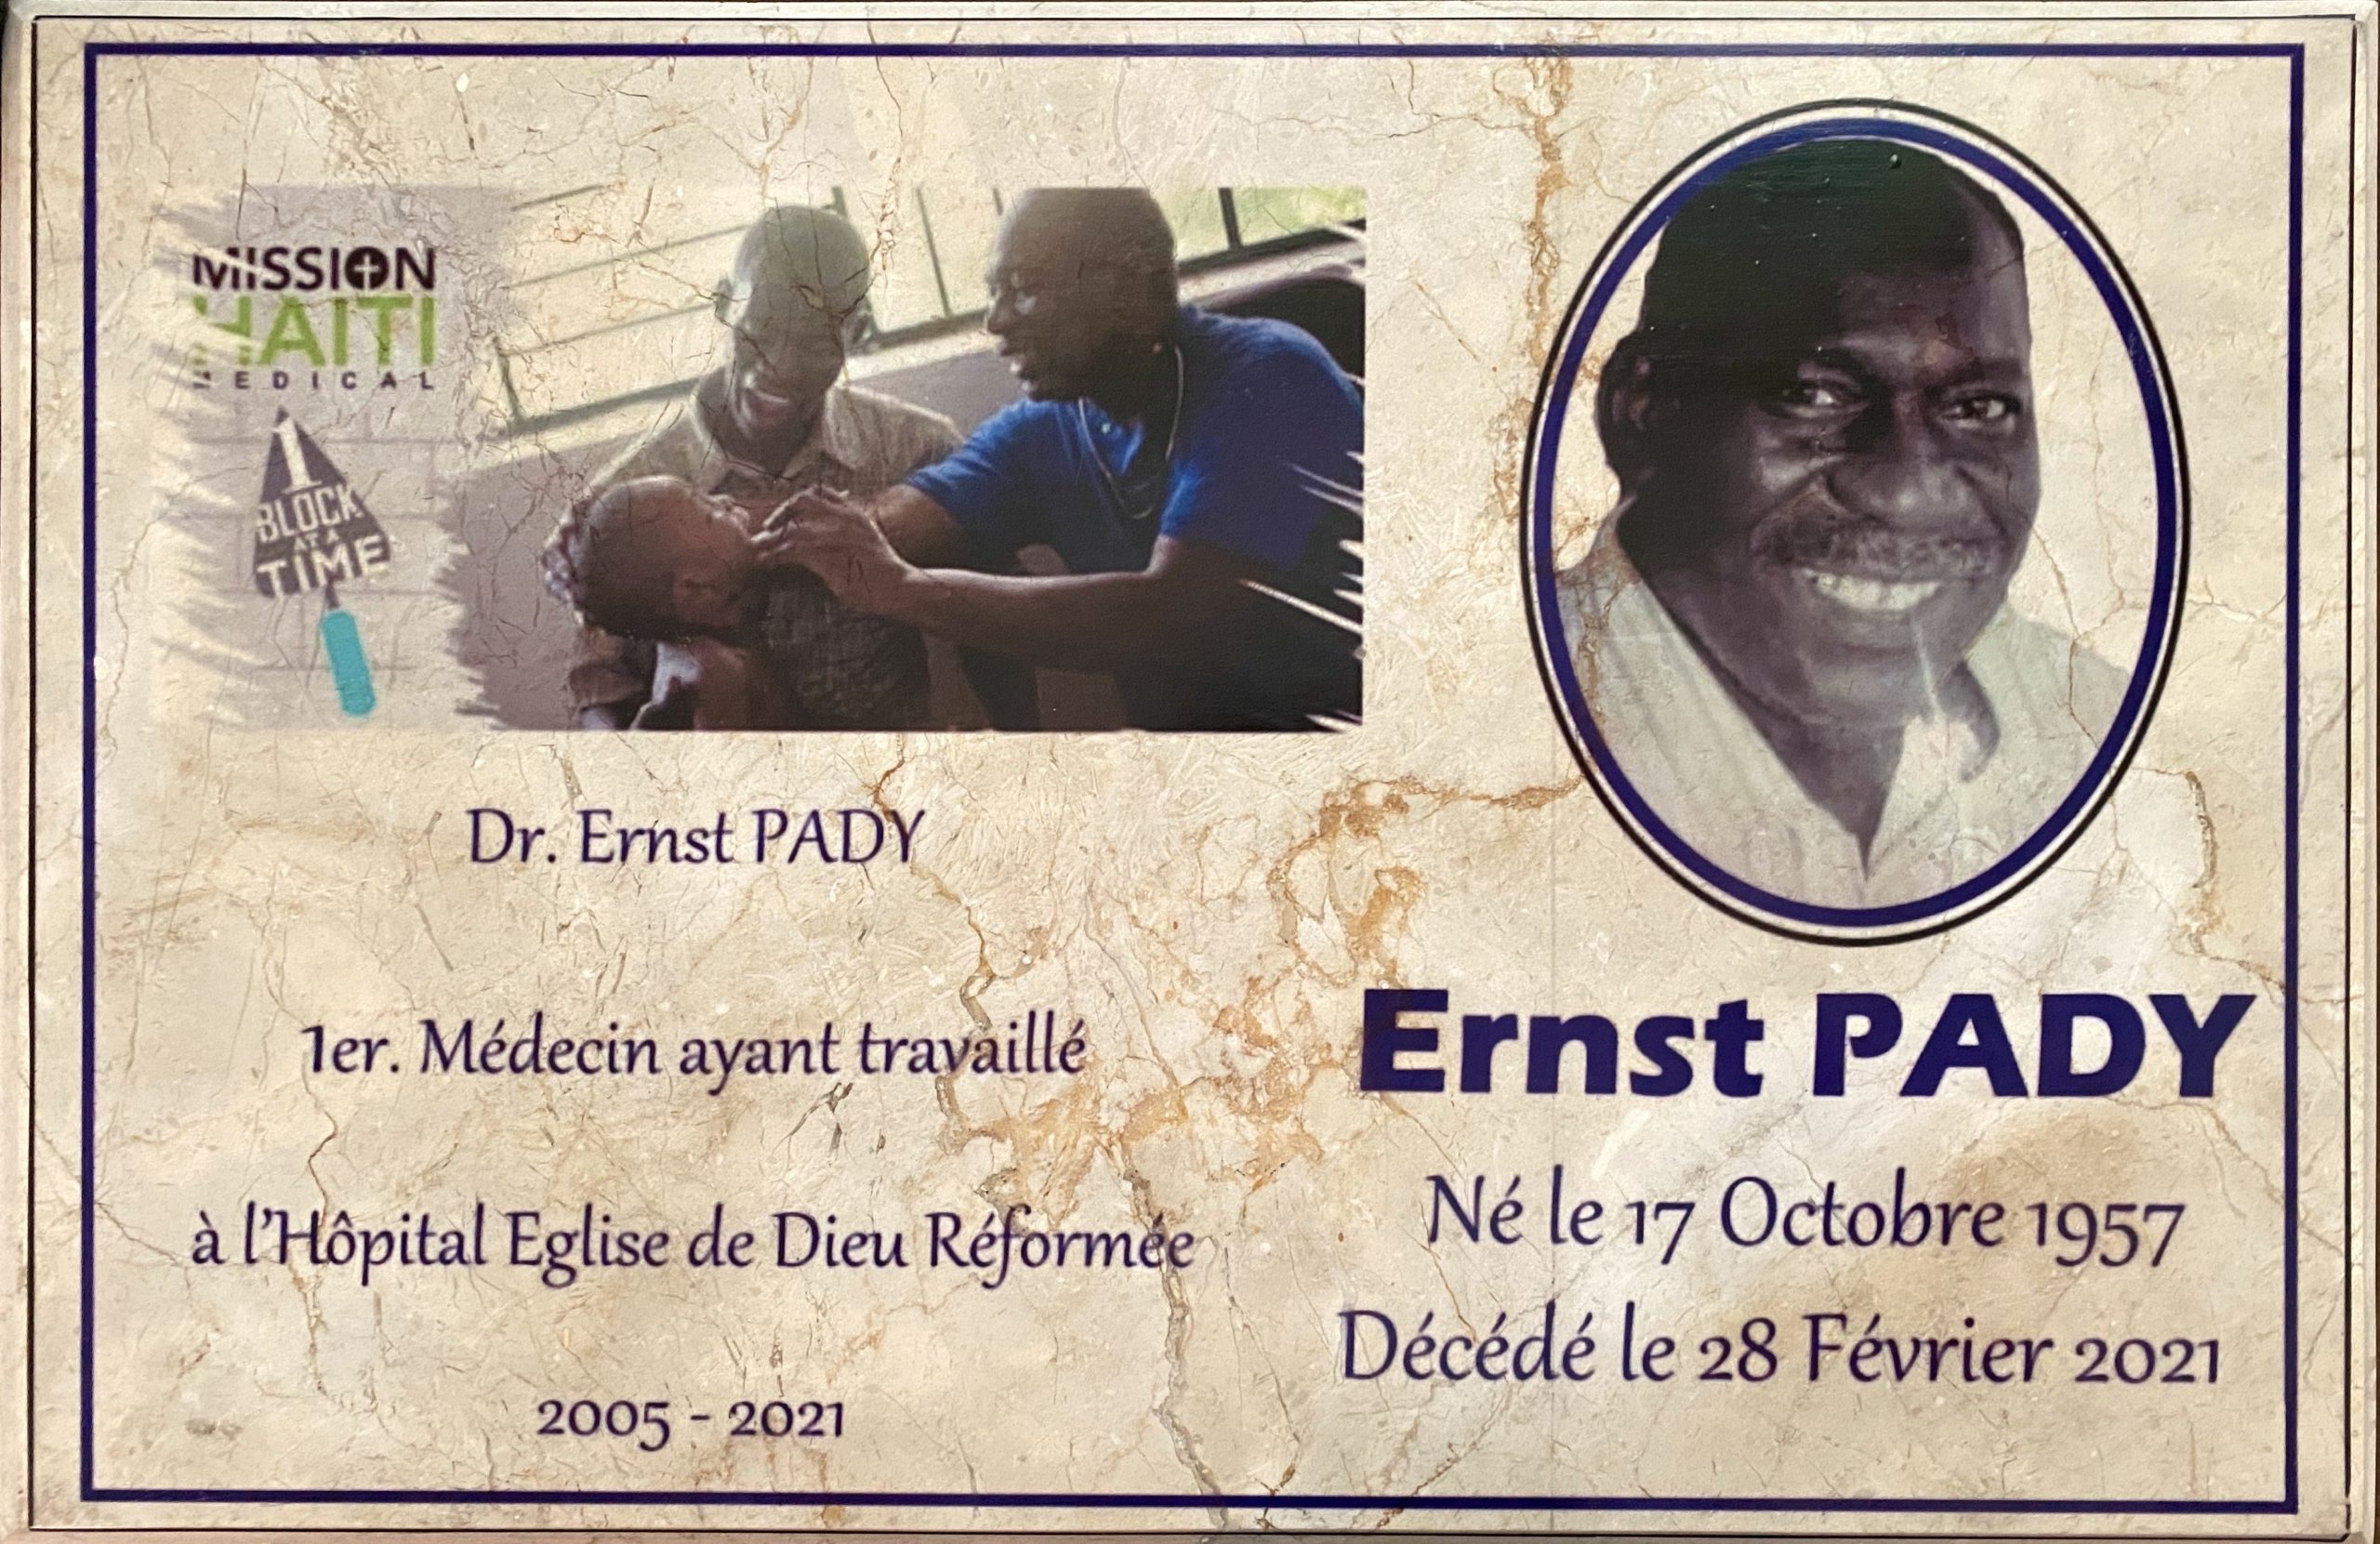 Dr. Pady’s Life of Service